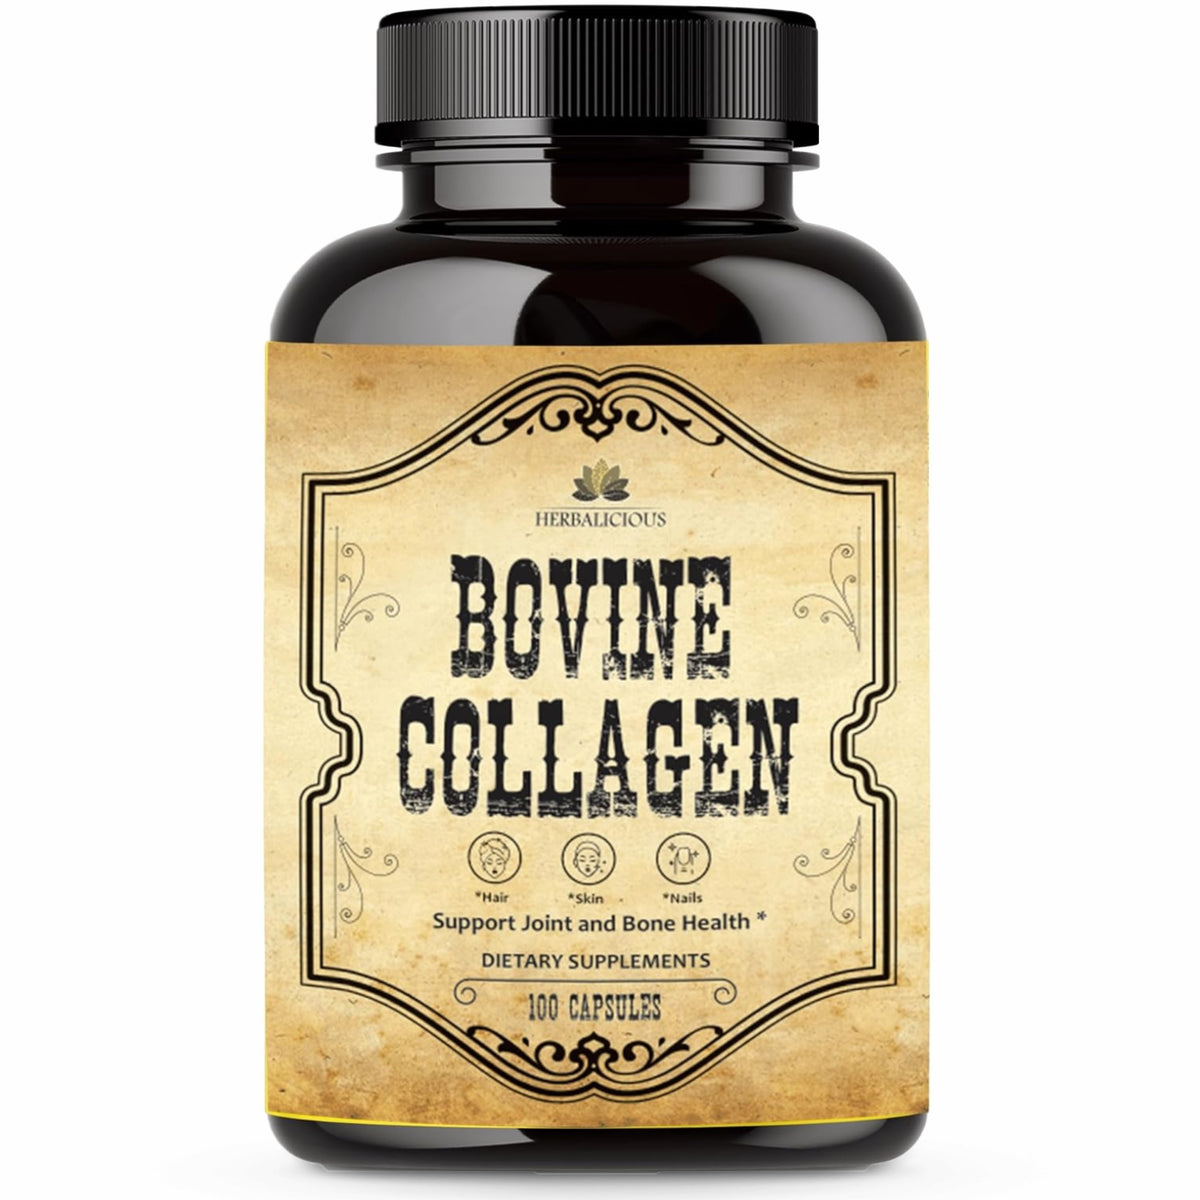 Bovine Collagen Supplements for Men and Women I Hydrolyzed Grass Fed Bovine Collagen Peptides Dietary Supplement for Joint, Nerve & Bone Support 